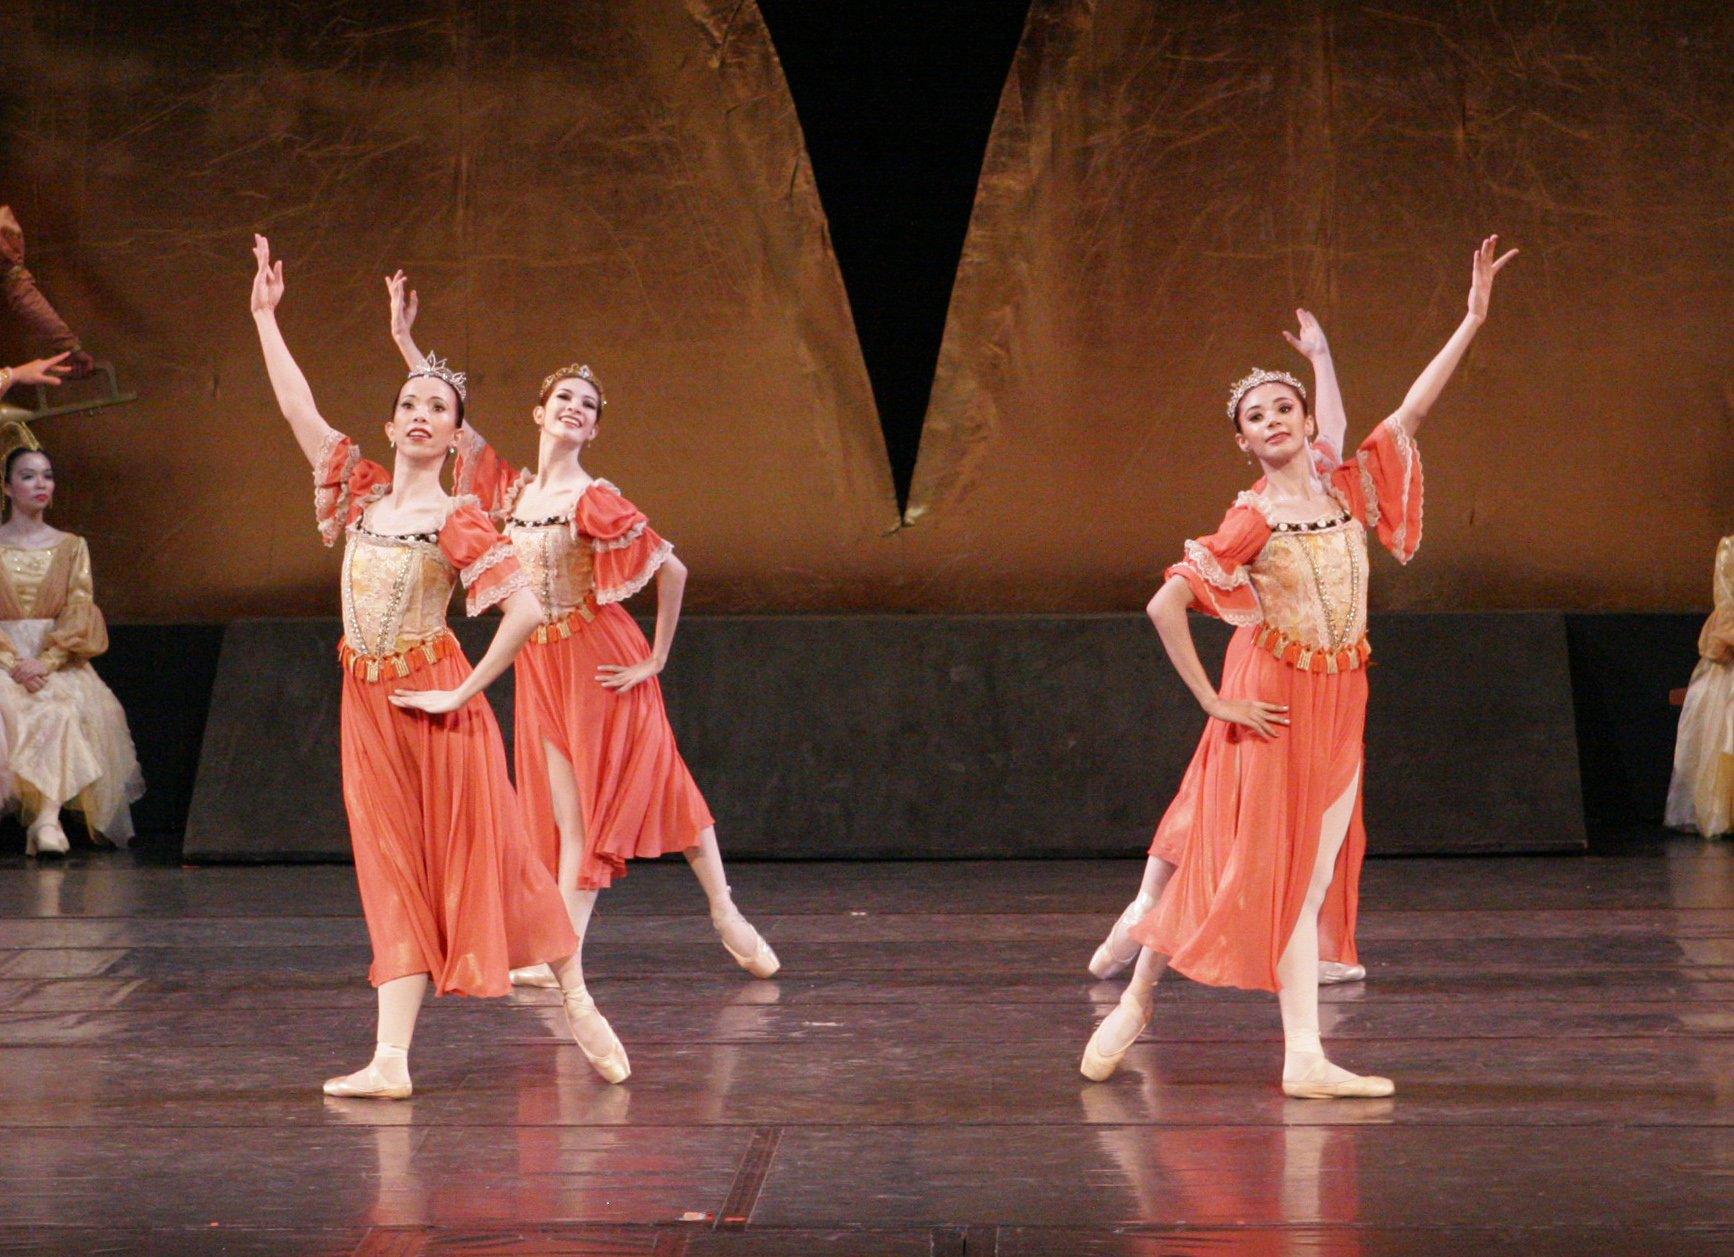    At the palace courtyard, there is celebration in the air as Prince Siegfried turns 21 in  Swan Lake  (2005). As part of the festivities, a waltz is danced in Act 1, with the ladies – Sarah Abigail Cruz, Gabriela Galvez, Eileen Lopez and Zaira Cosi